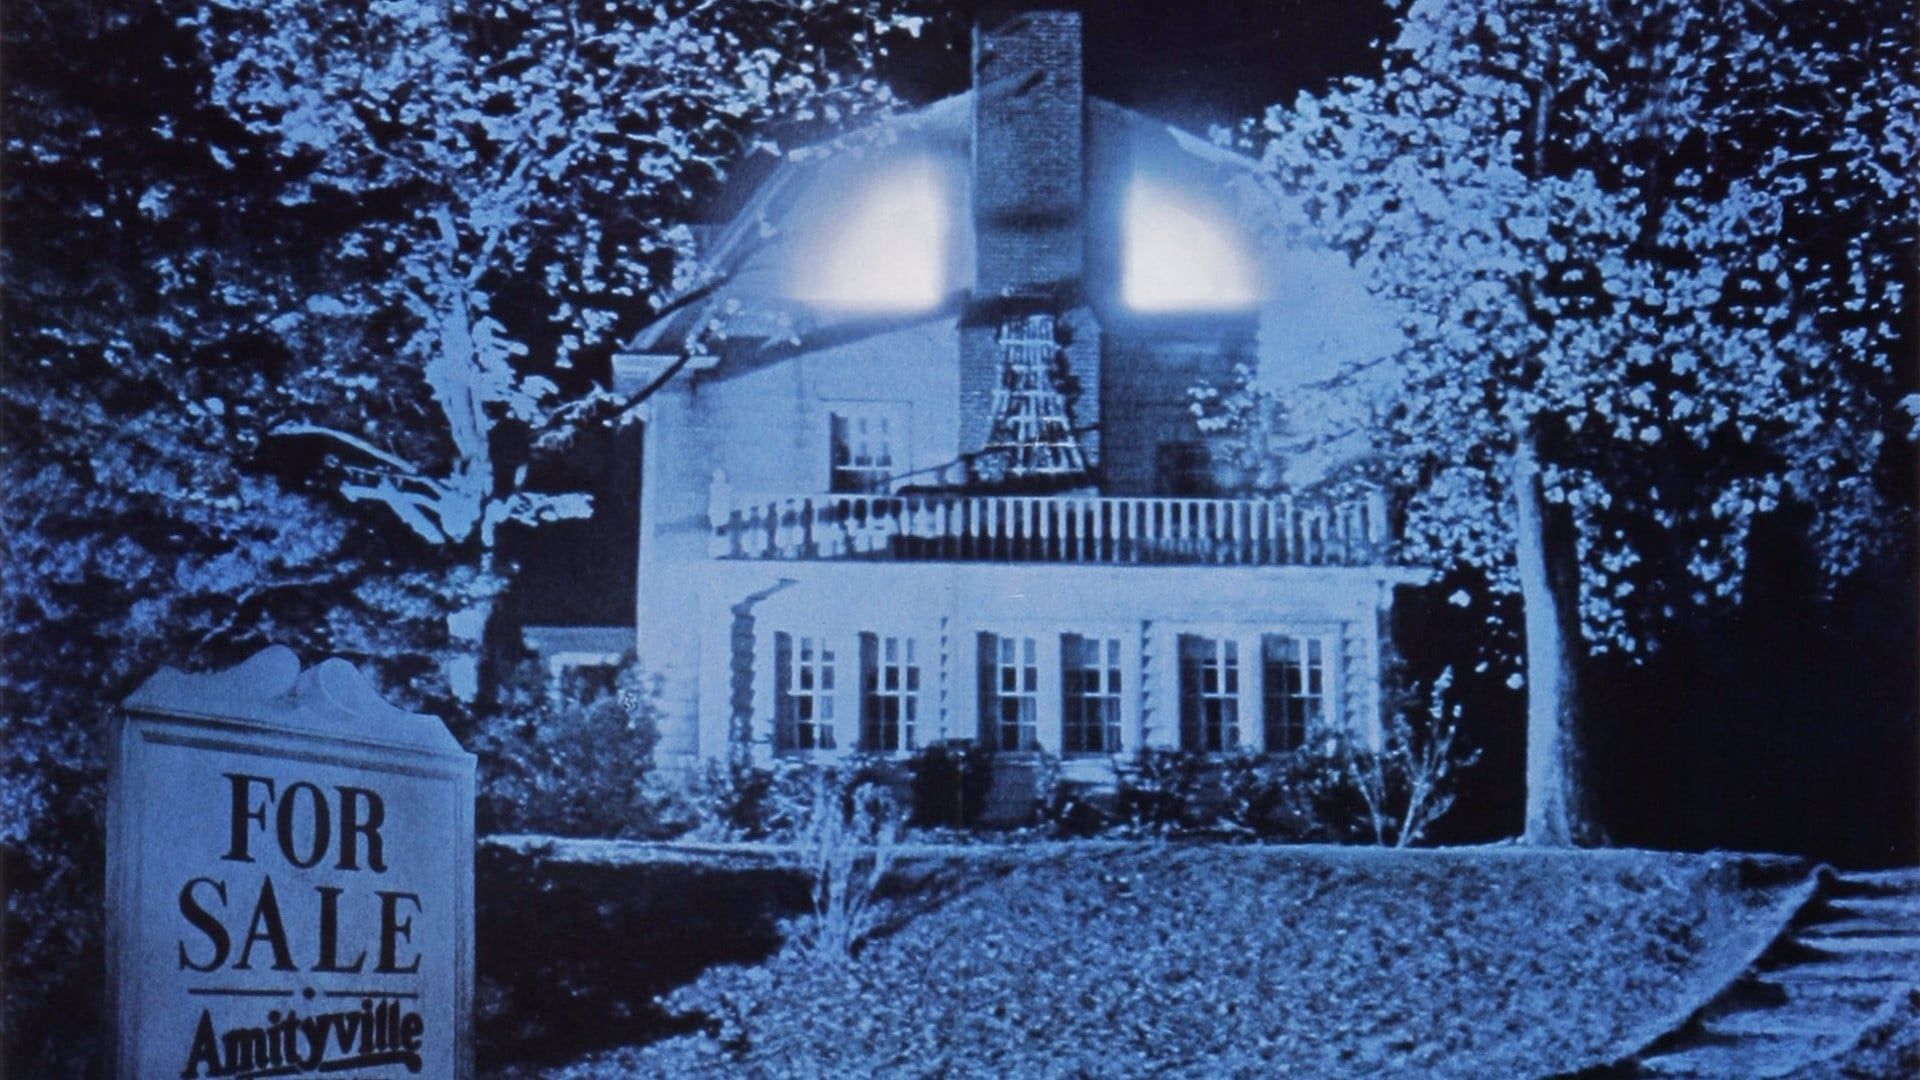 Amityville II: The Possession Backdrop